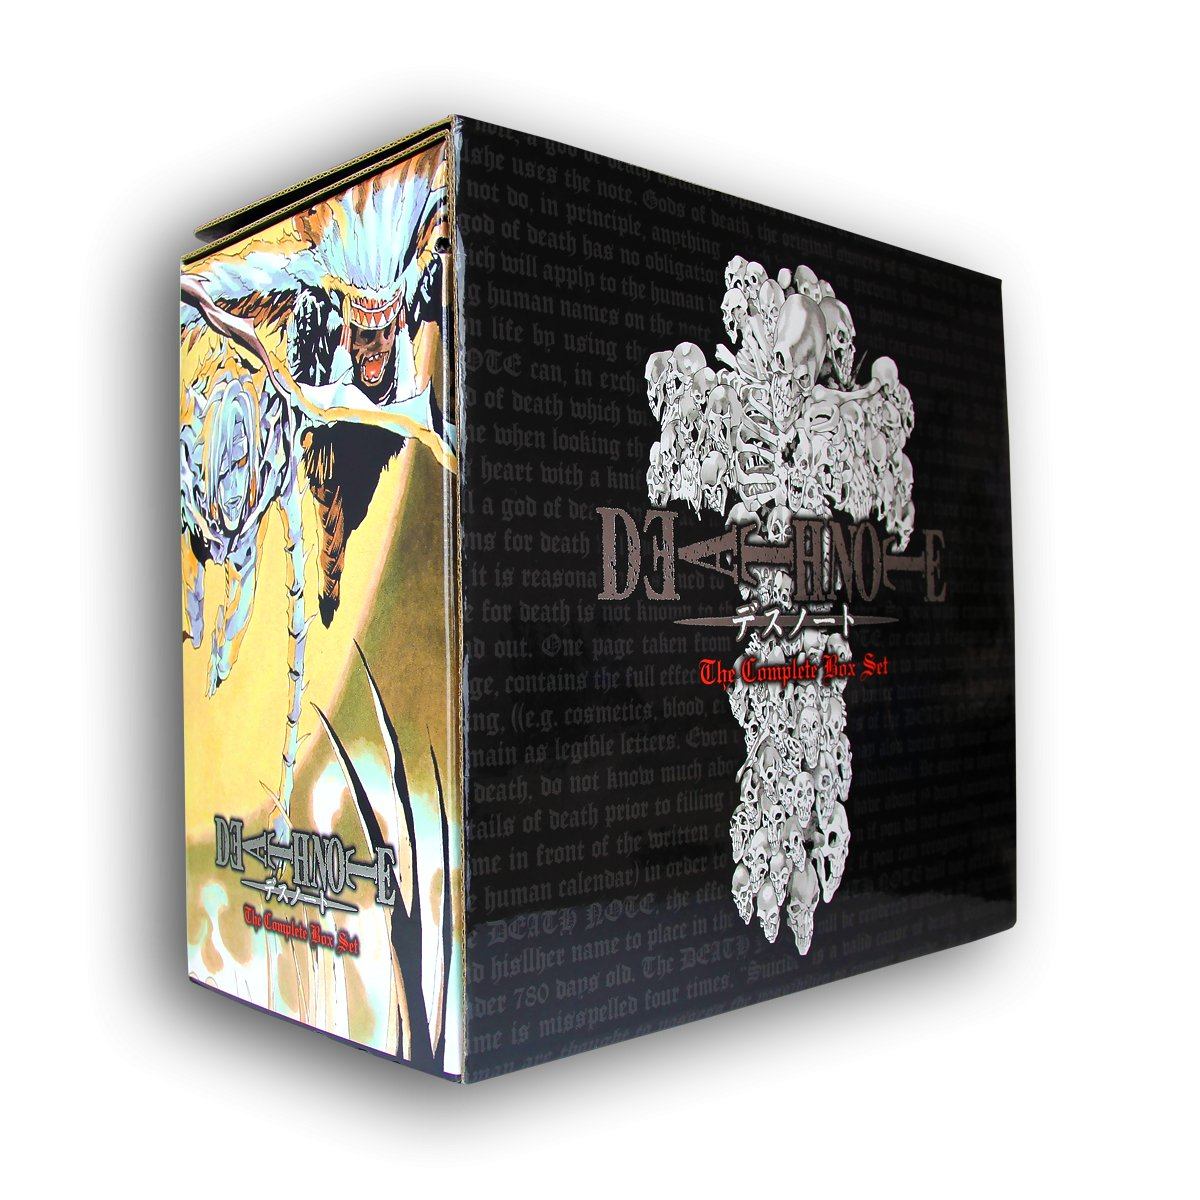 —　Takeshi　Ohba　Box　Tsugumi　The　Death　Book　Set　Complete　Note:　Books2Door　by　Obata: